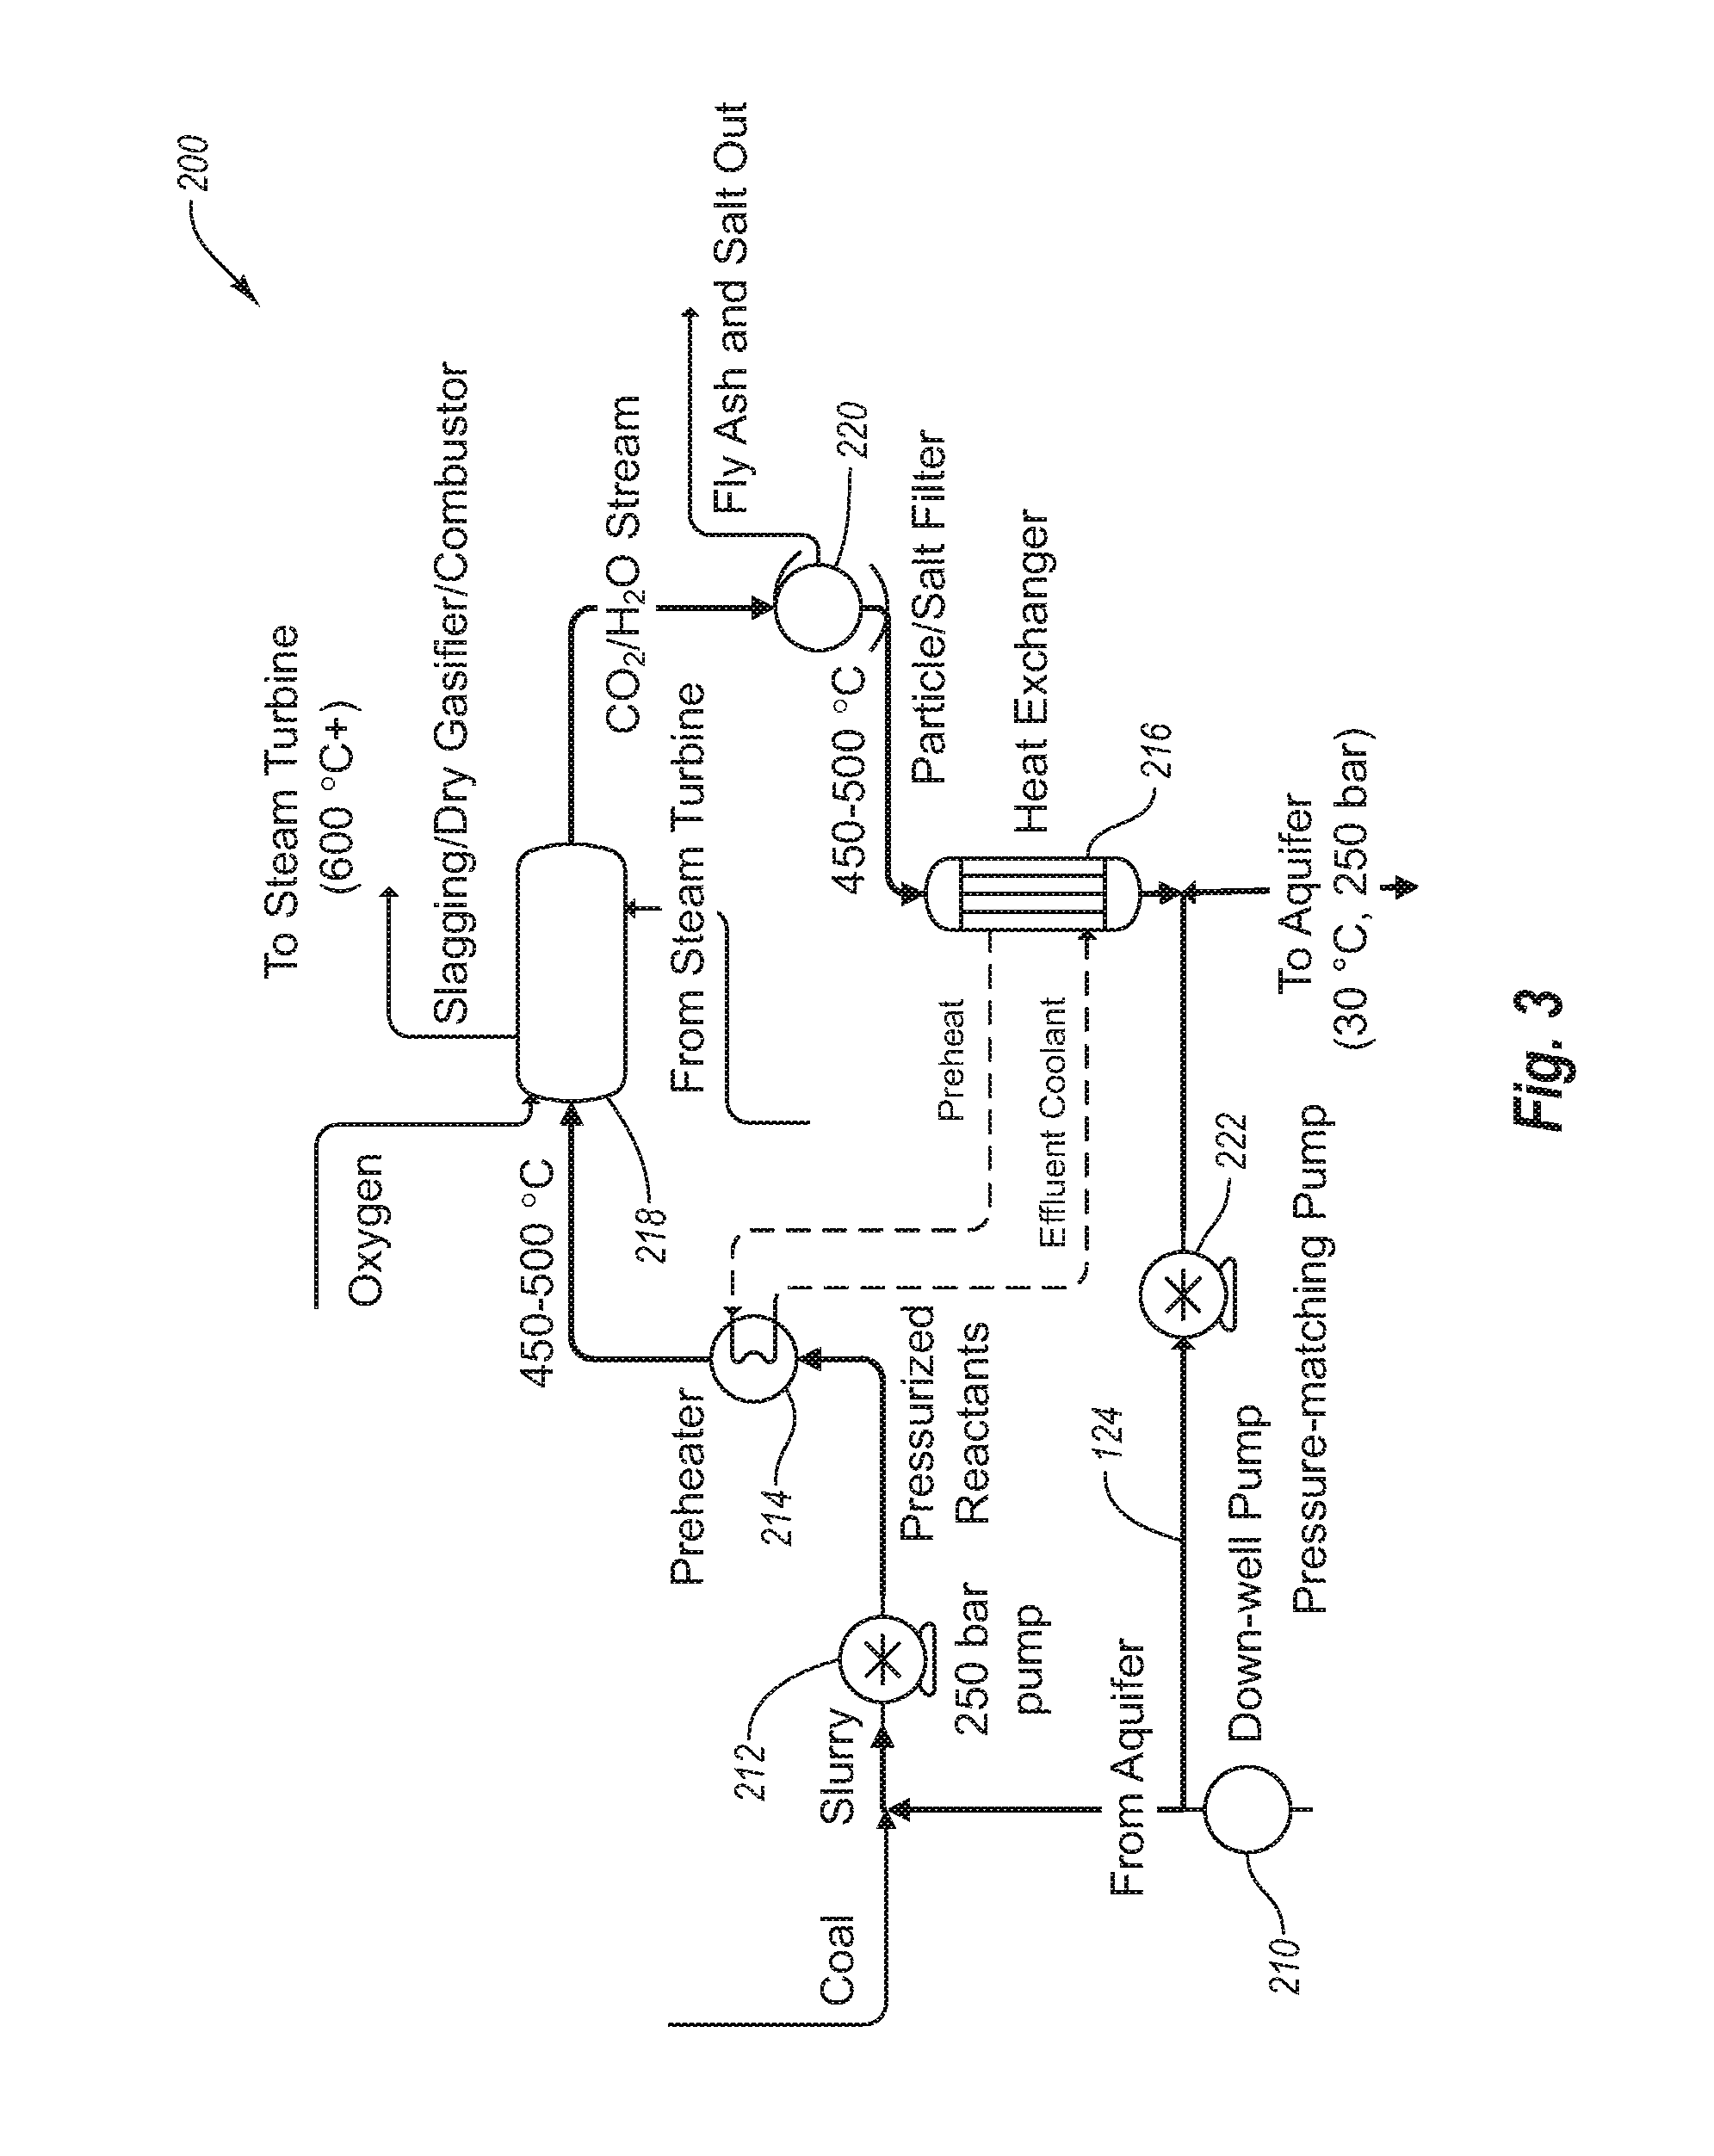 Methods for stable sequestration of carbon dioxide in an aquifer